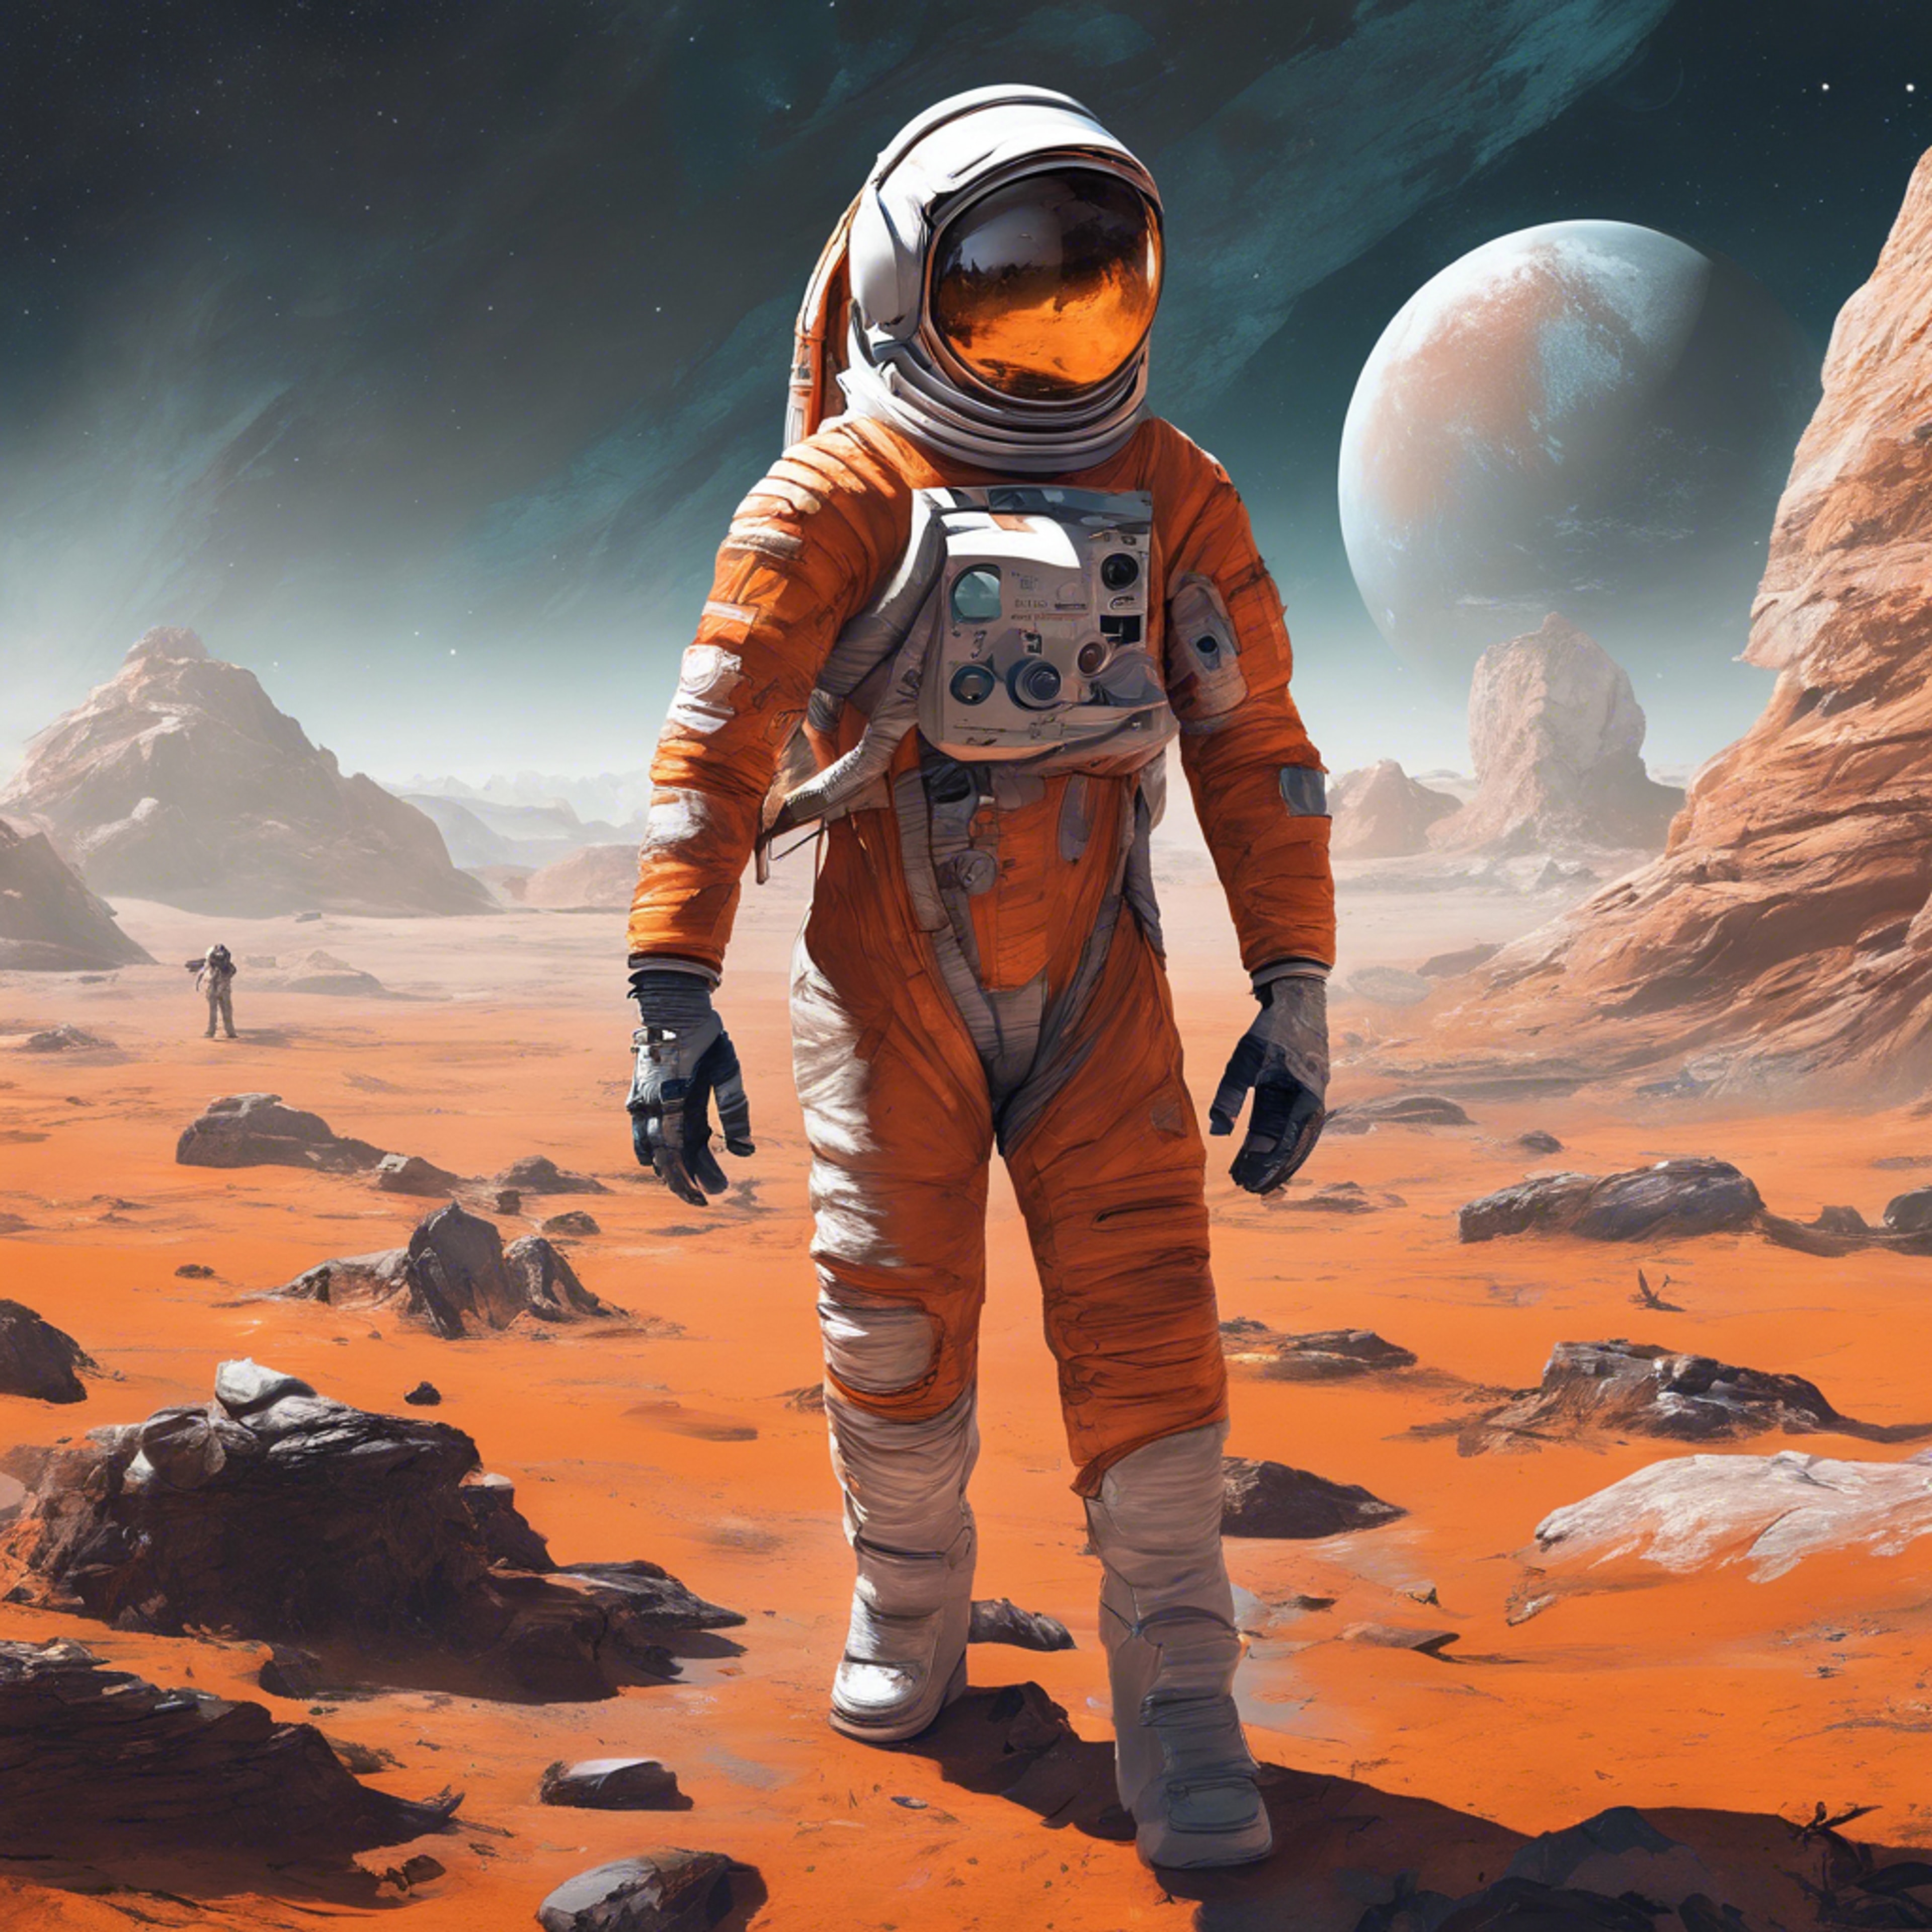 A space-themed video game featuring an astronaut in an orange and white suit exploring an alien planet. Tapeta[5d2c49abc07a4c83ad01]